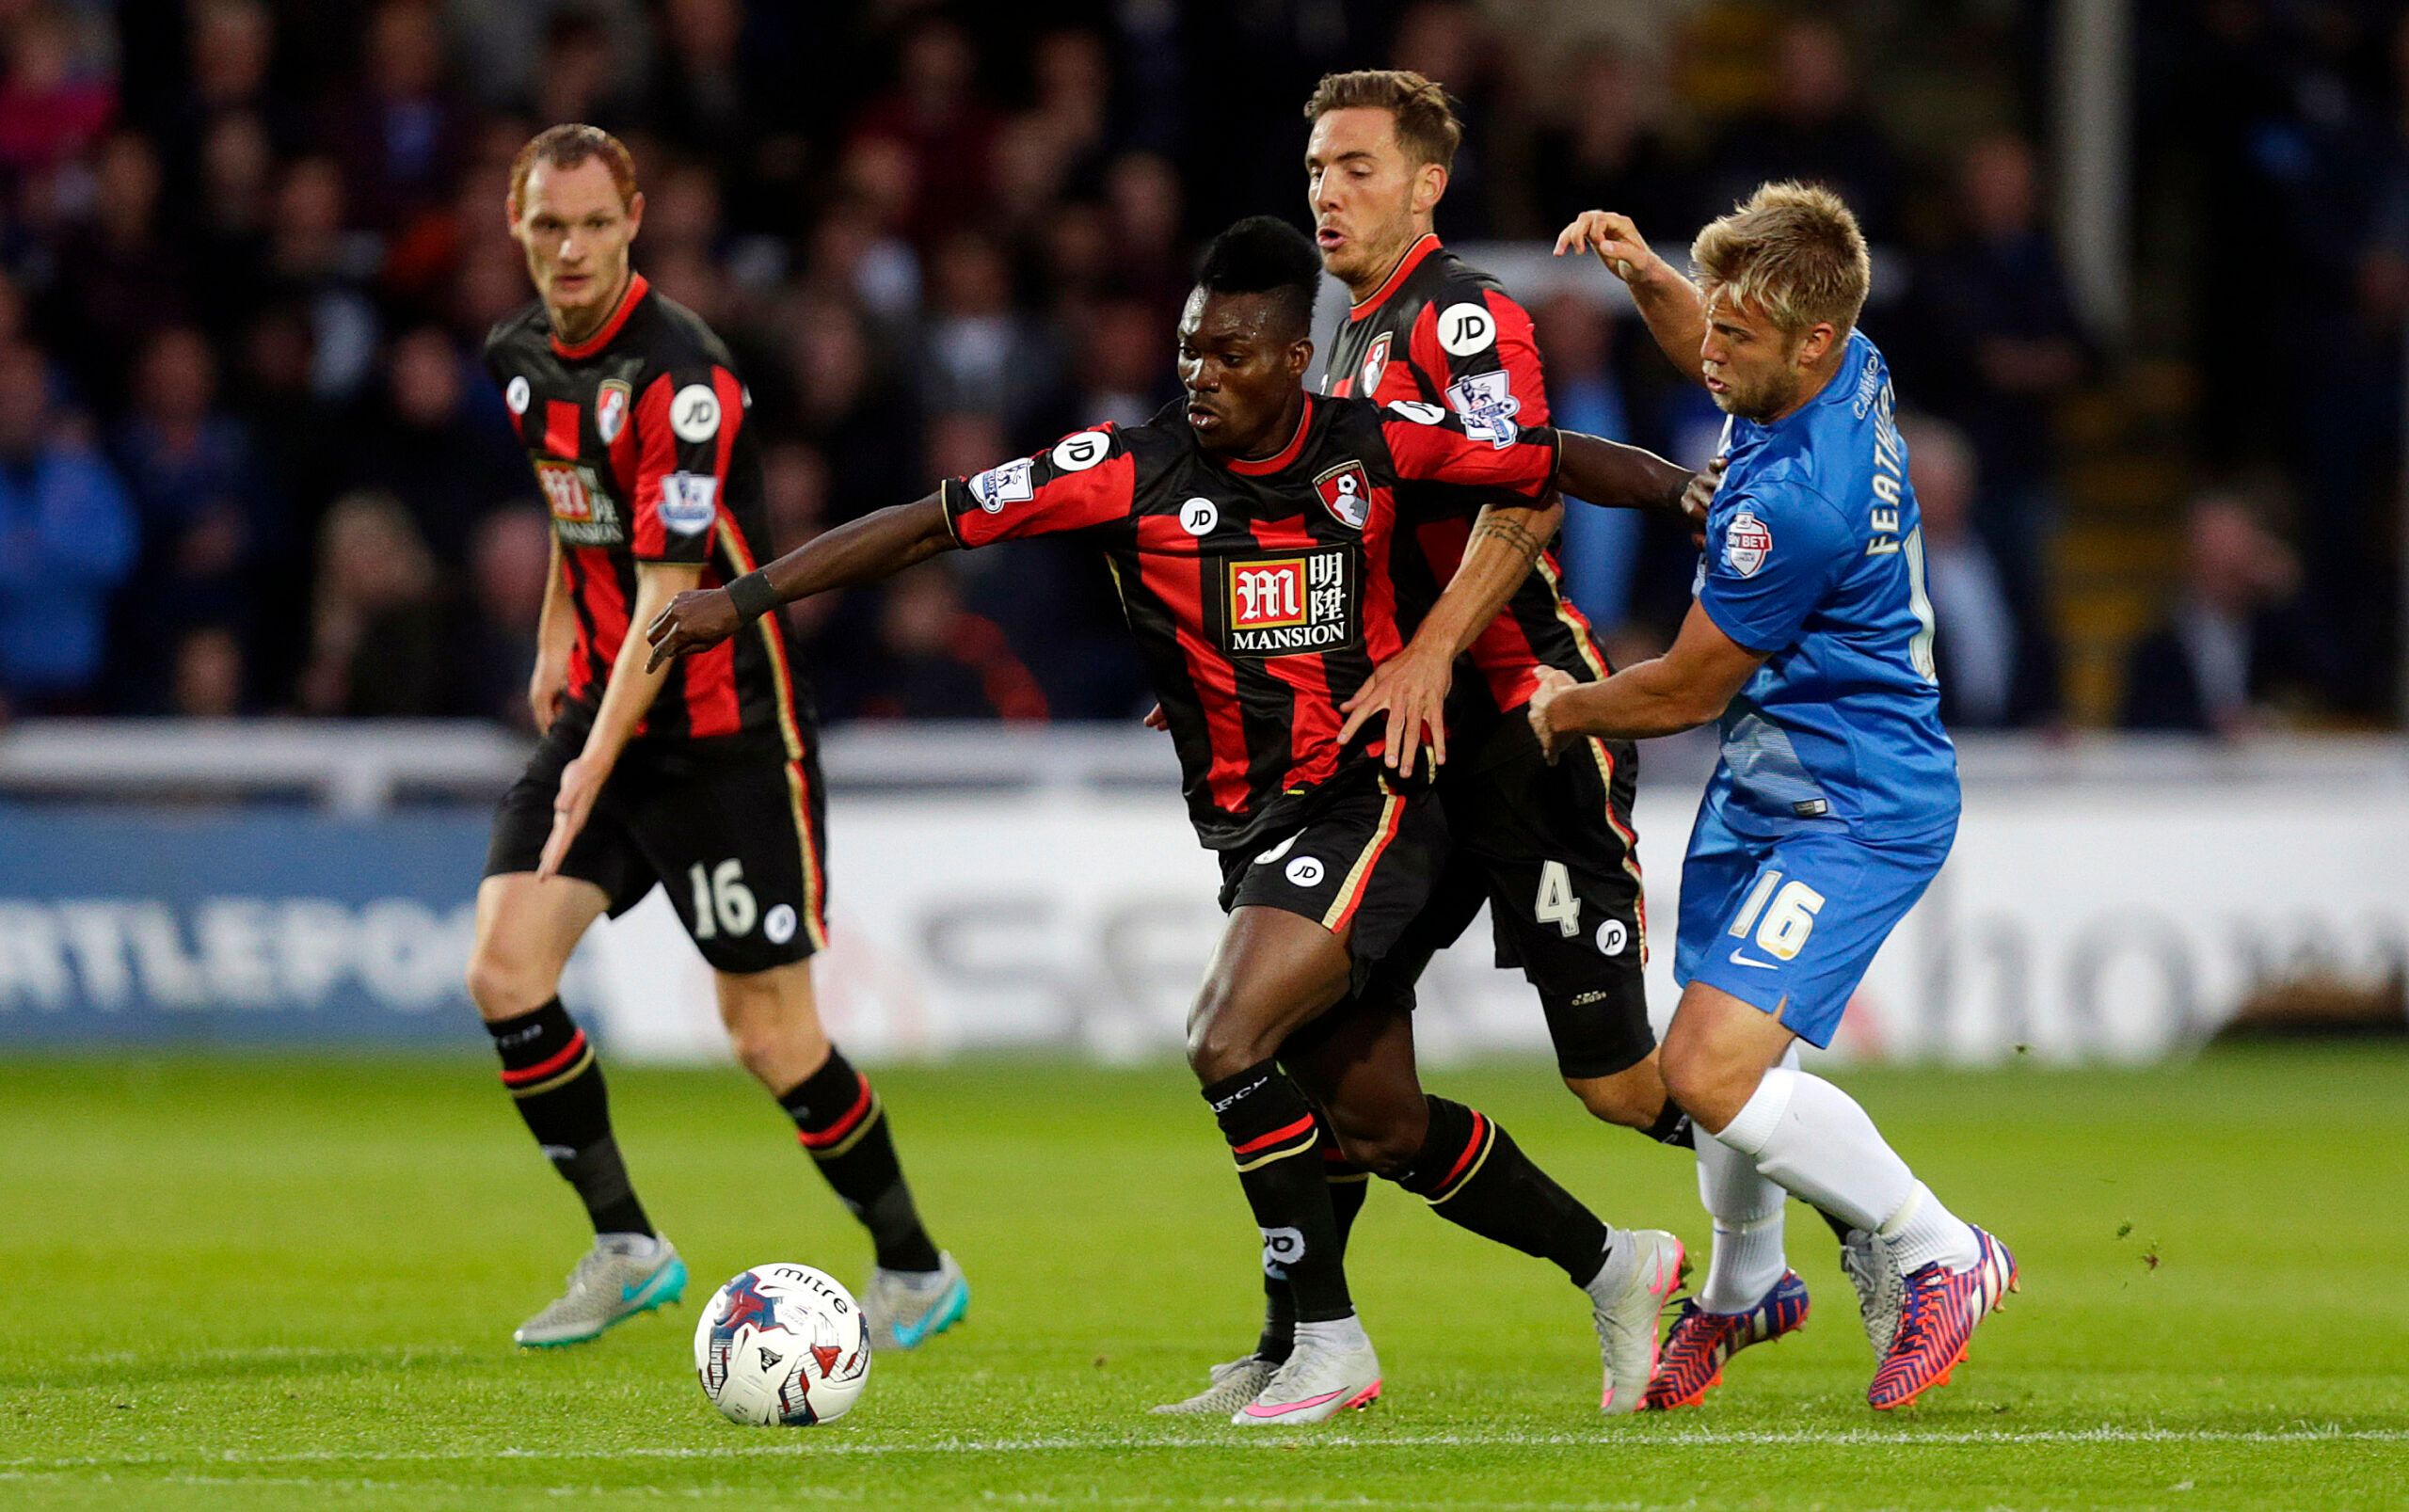 Football - Hartlepool United v AFC Bournemouth - Capital One Cup Second Round - Victoria Park - 25/8/15 
Hartlepool United's Nicky Featherstone (R) in action with Bournemouth's Christian Atsu 
Mandatory Credit: Action Images / Graham Stuart 
Livepic 
EDITORIAL USE ONLY. No use with unauthorized audio, video, data, fixture lists, club/league logos or 